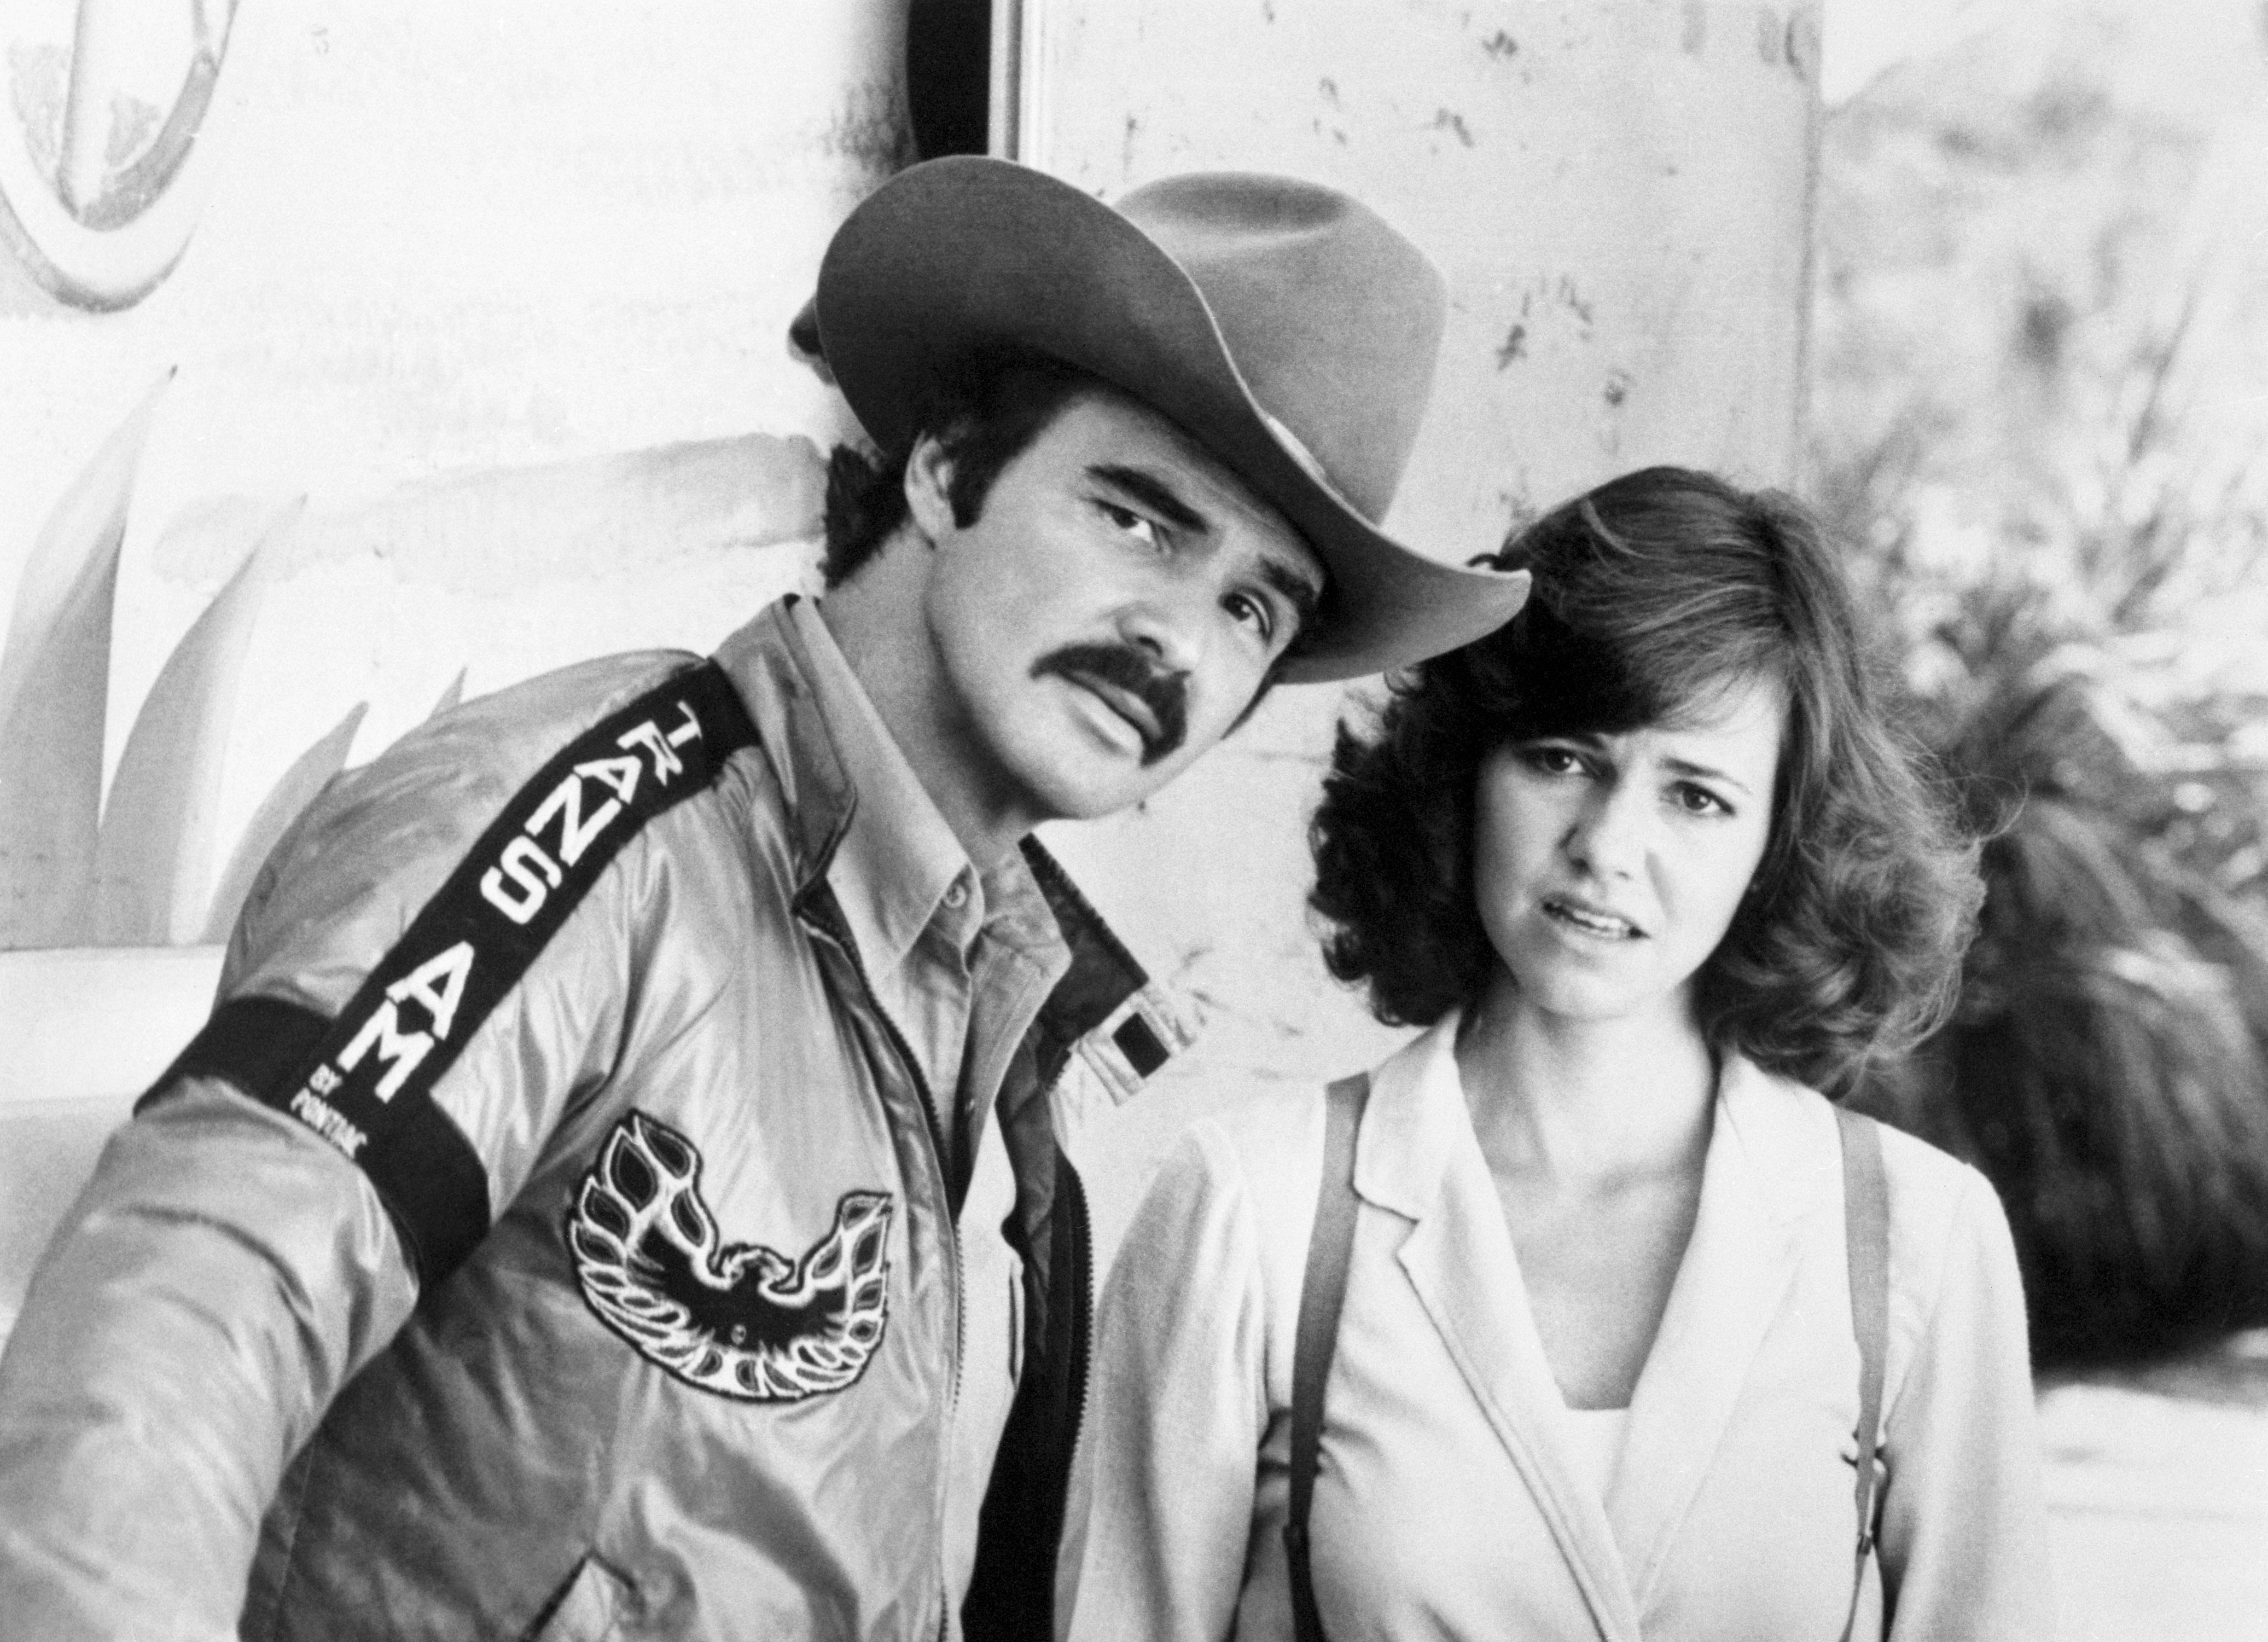 Burt Reynolds and Sally Field in a scene from "Smokey and the Bandit III" | Source: Getty Images